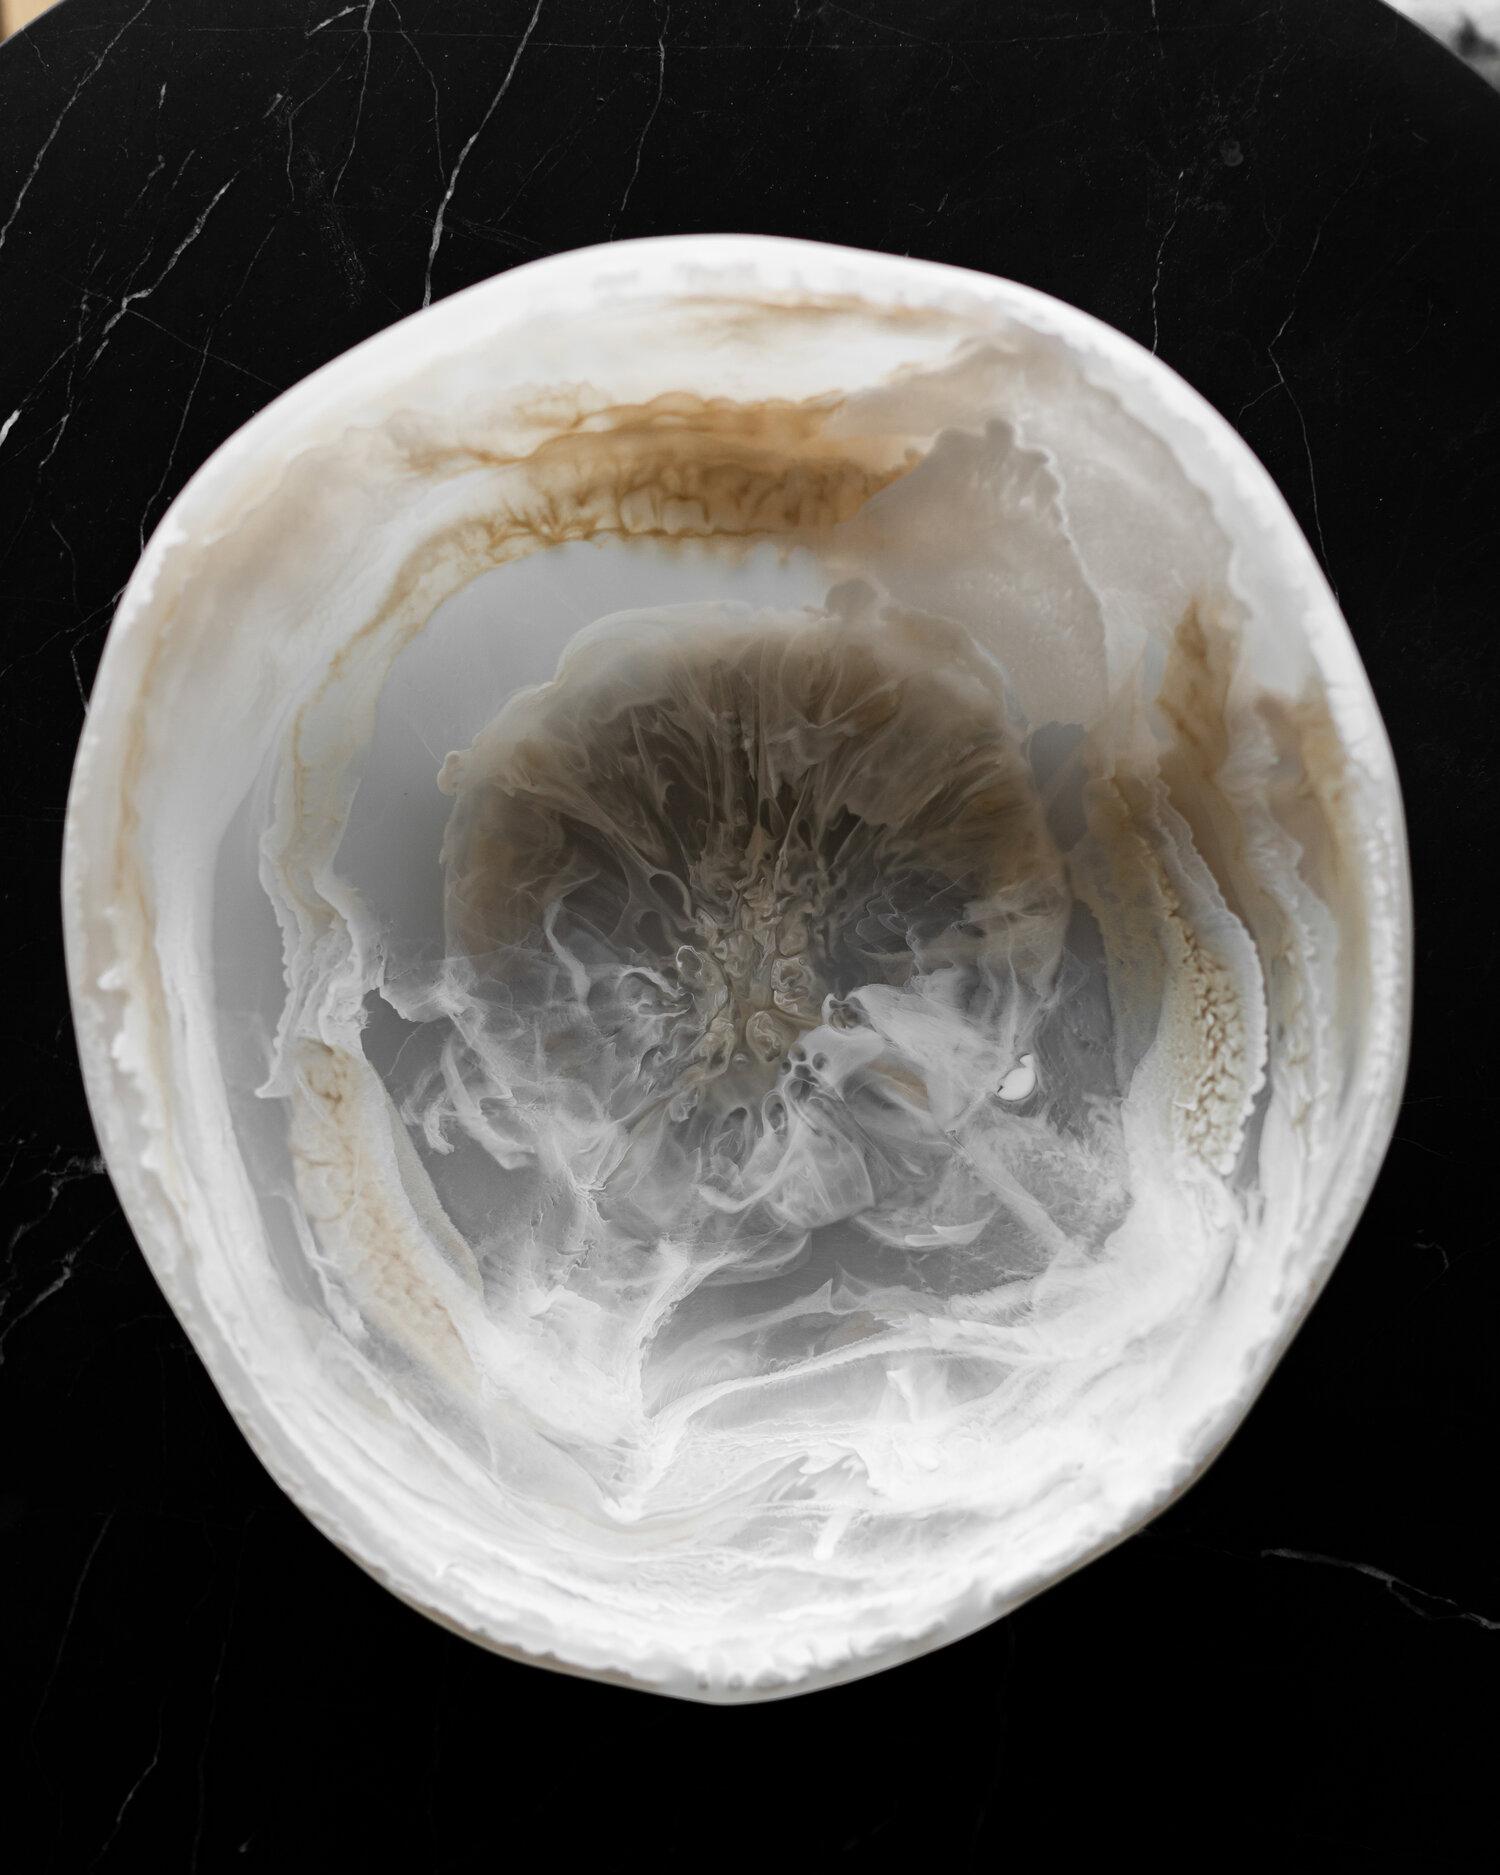 This pearl marble resin bowl's shape evokes that of natural stone, and is a beautiful example of the artisanal craftsmanship that goes into each piece designed by Monica Calderon and handmade by expert artisans in Mexico. The stone resin bowl in